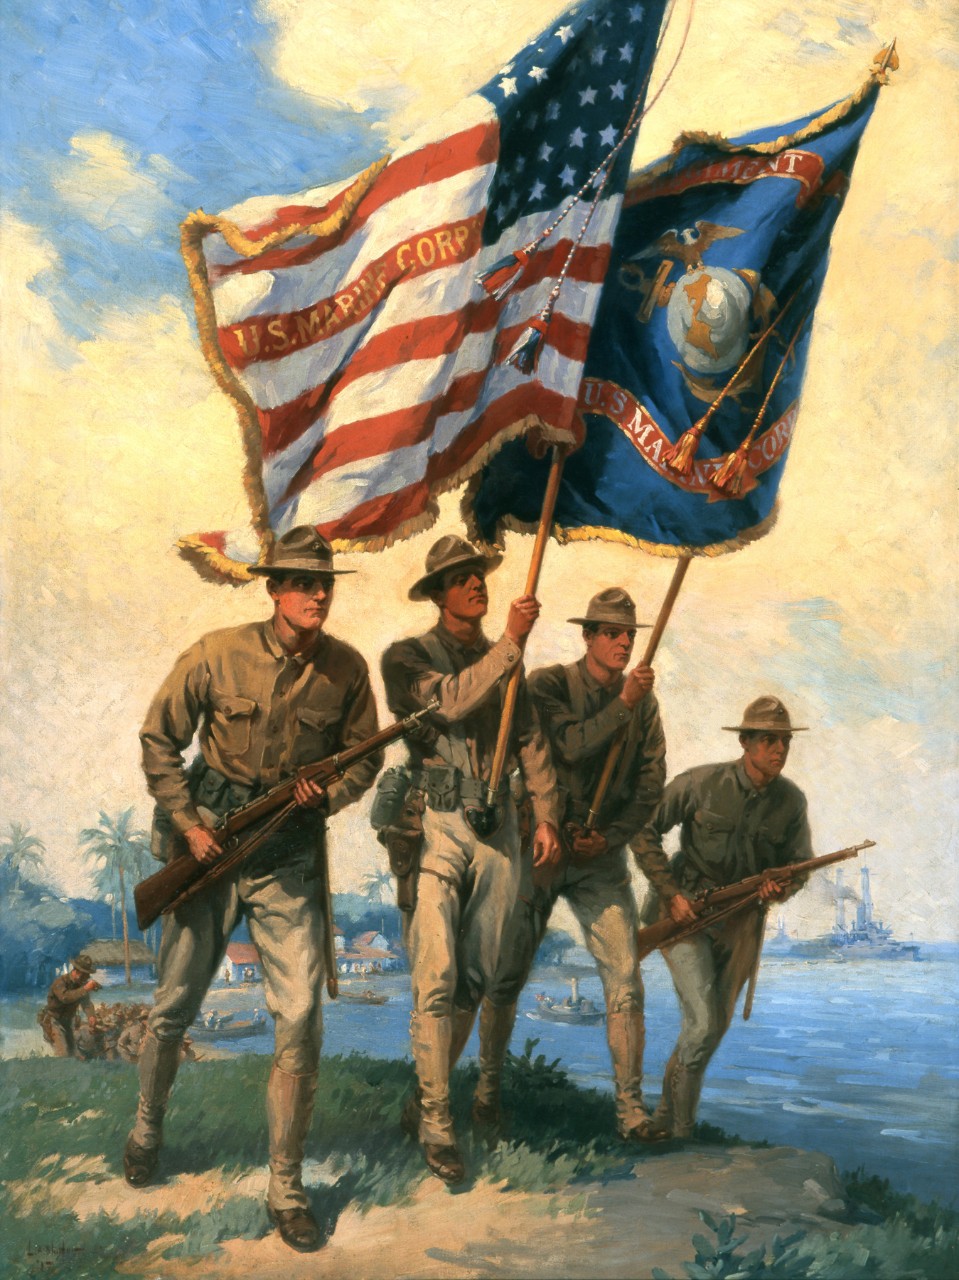 Four marines marching, the center two are carrying flags. The one on the left is holding the American flag, the one on the right is holding the marine corp flag. The other two marines are carrying rifles.